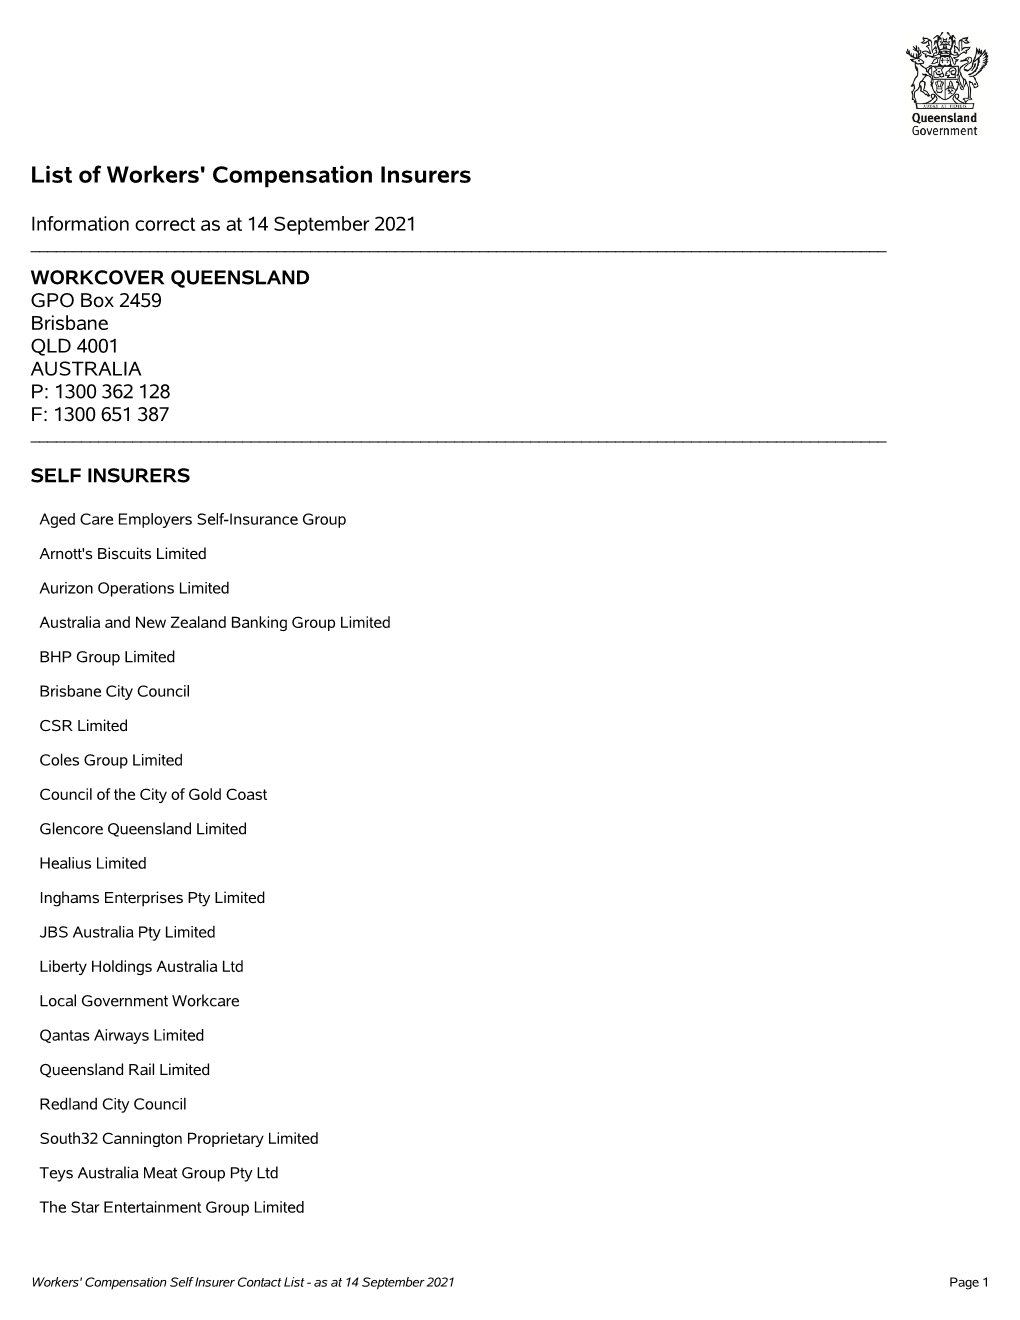 Workers' Compensation Self-Insurer Contact List